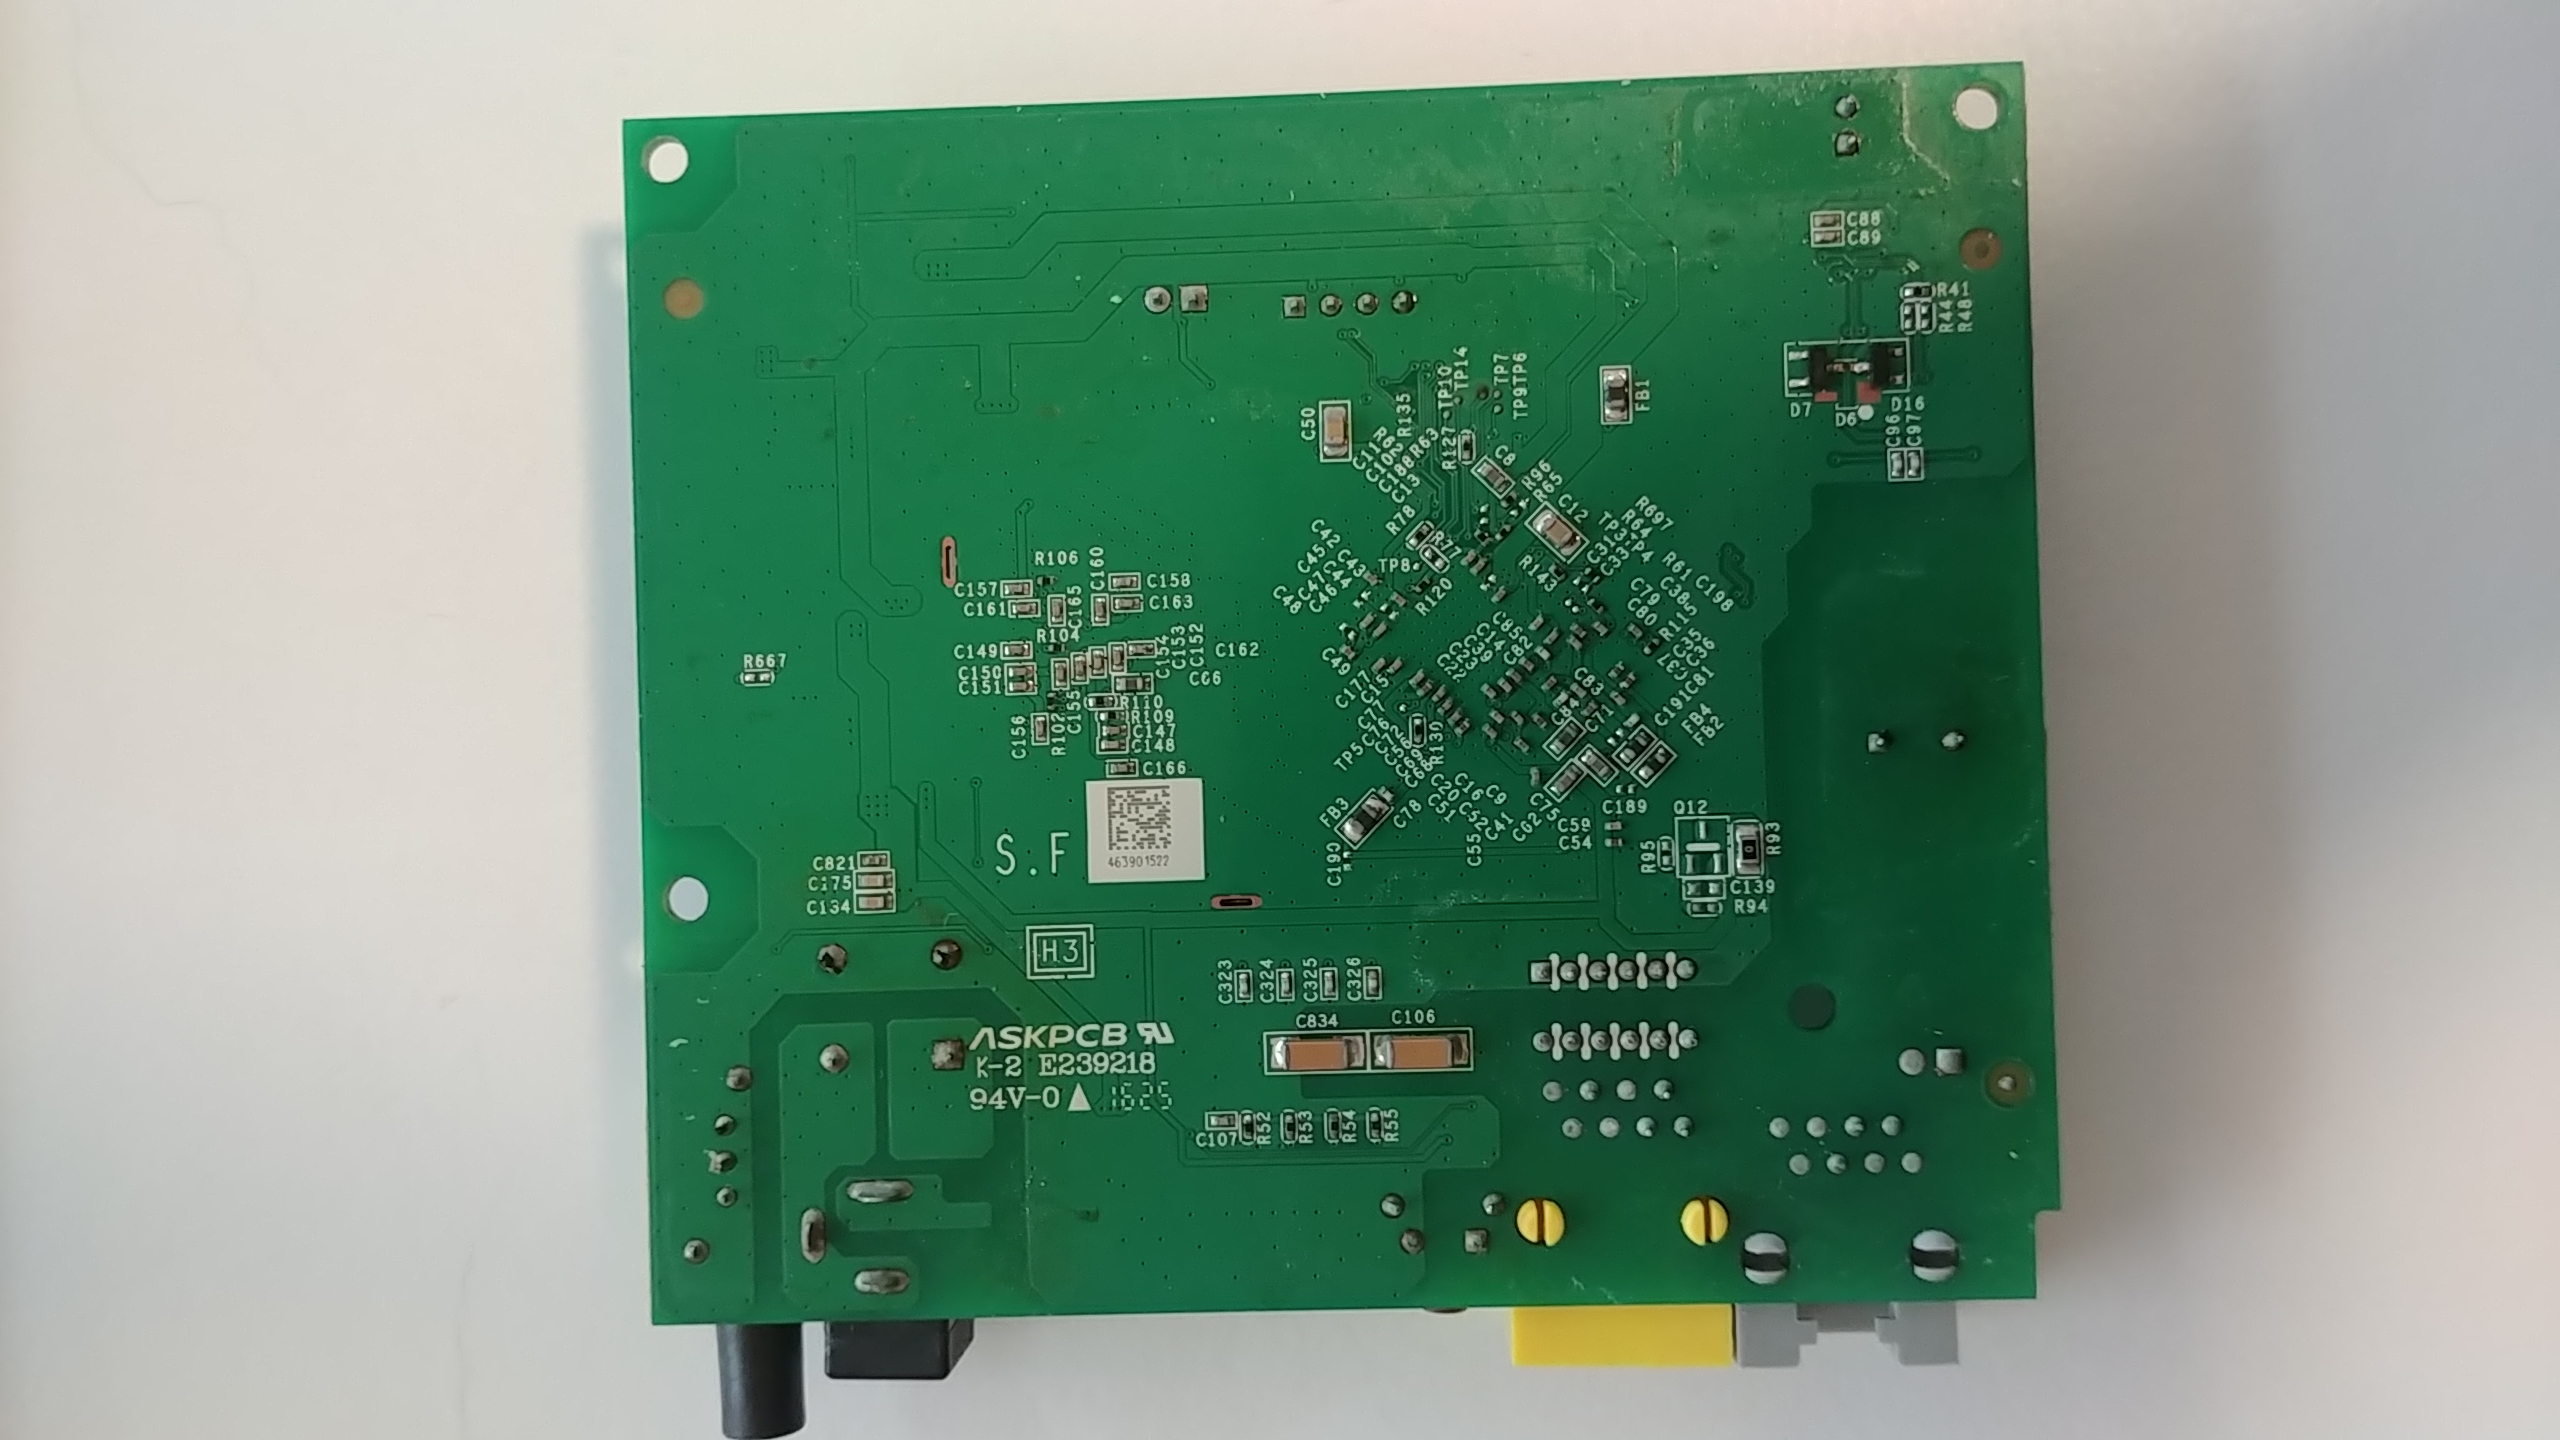 Back of the PCB